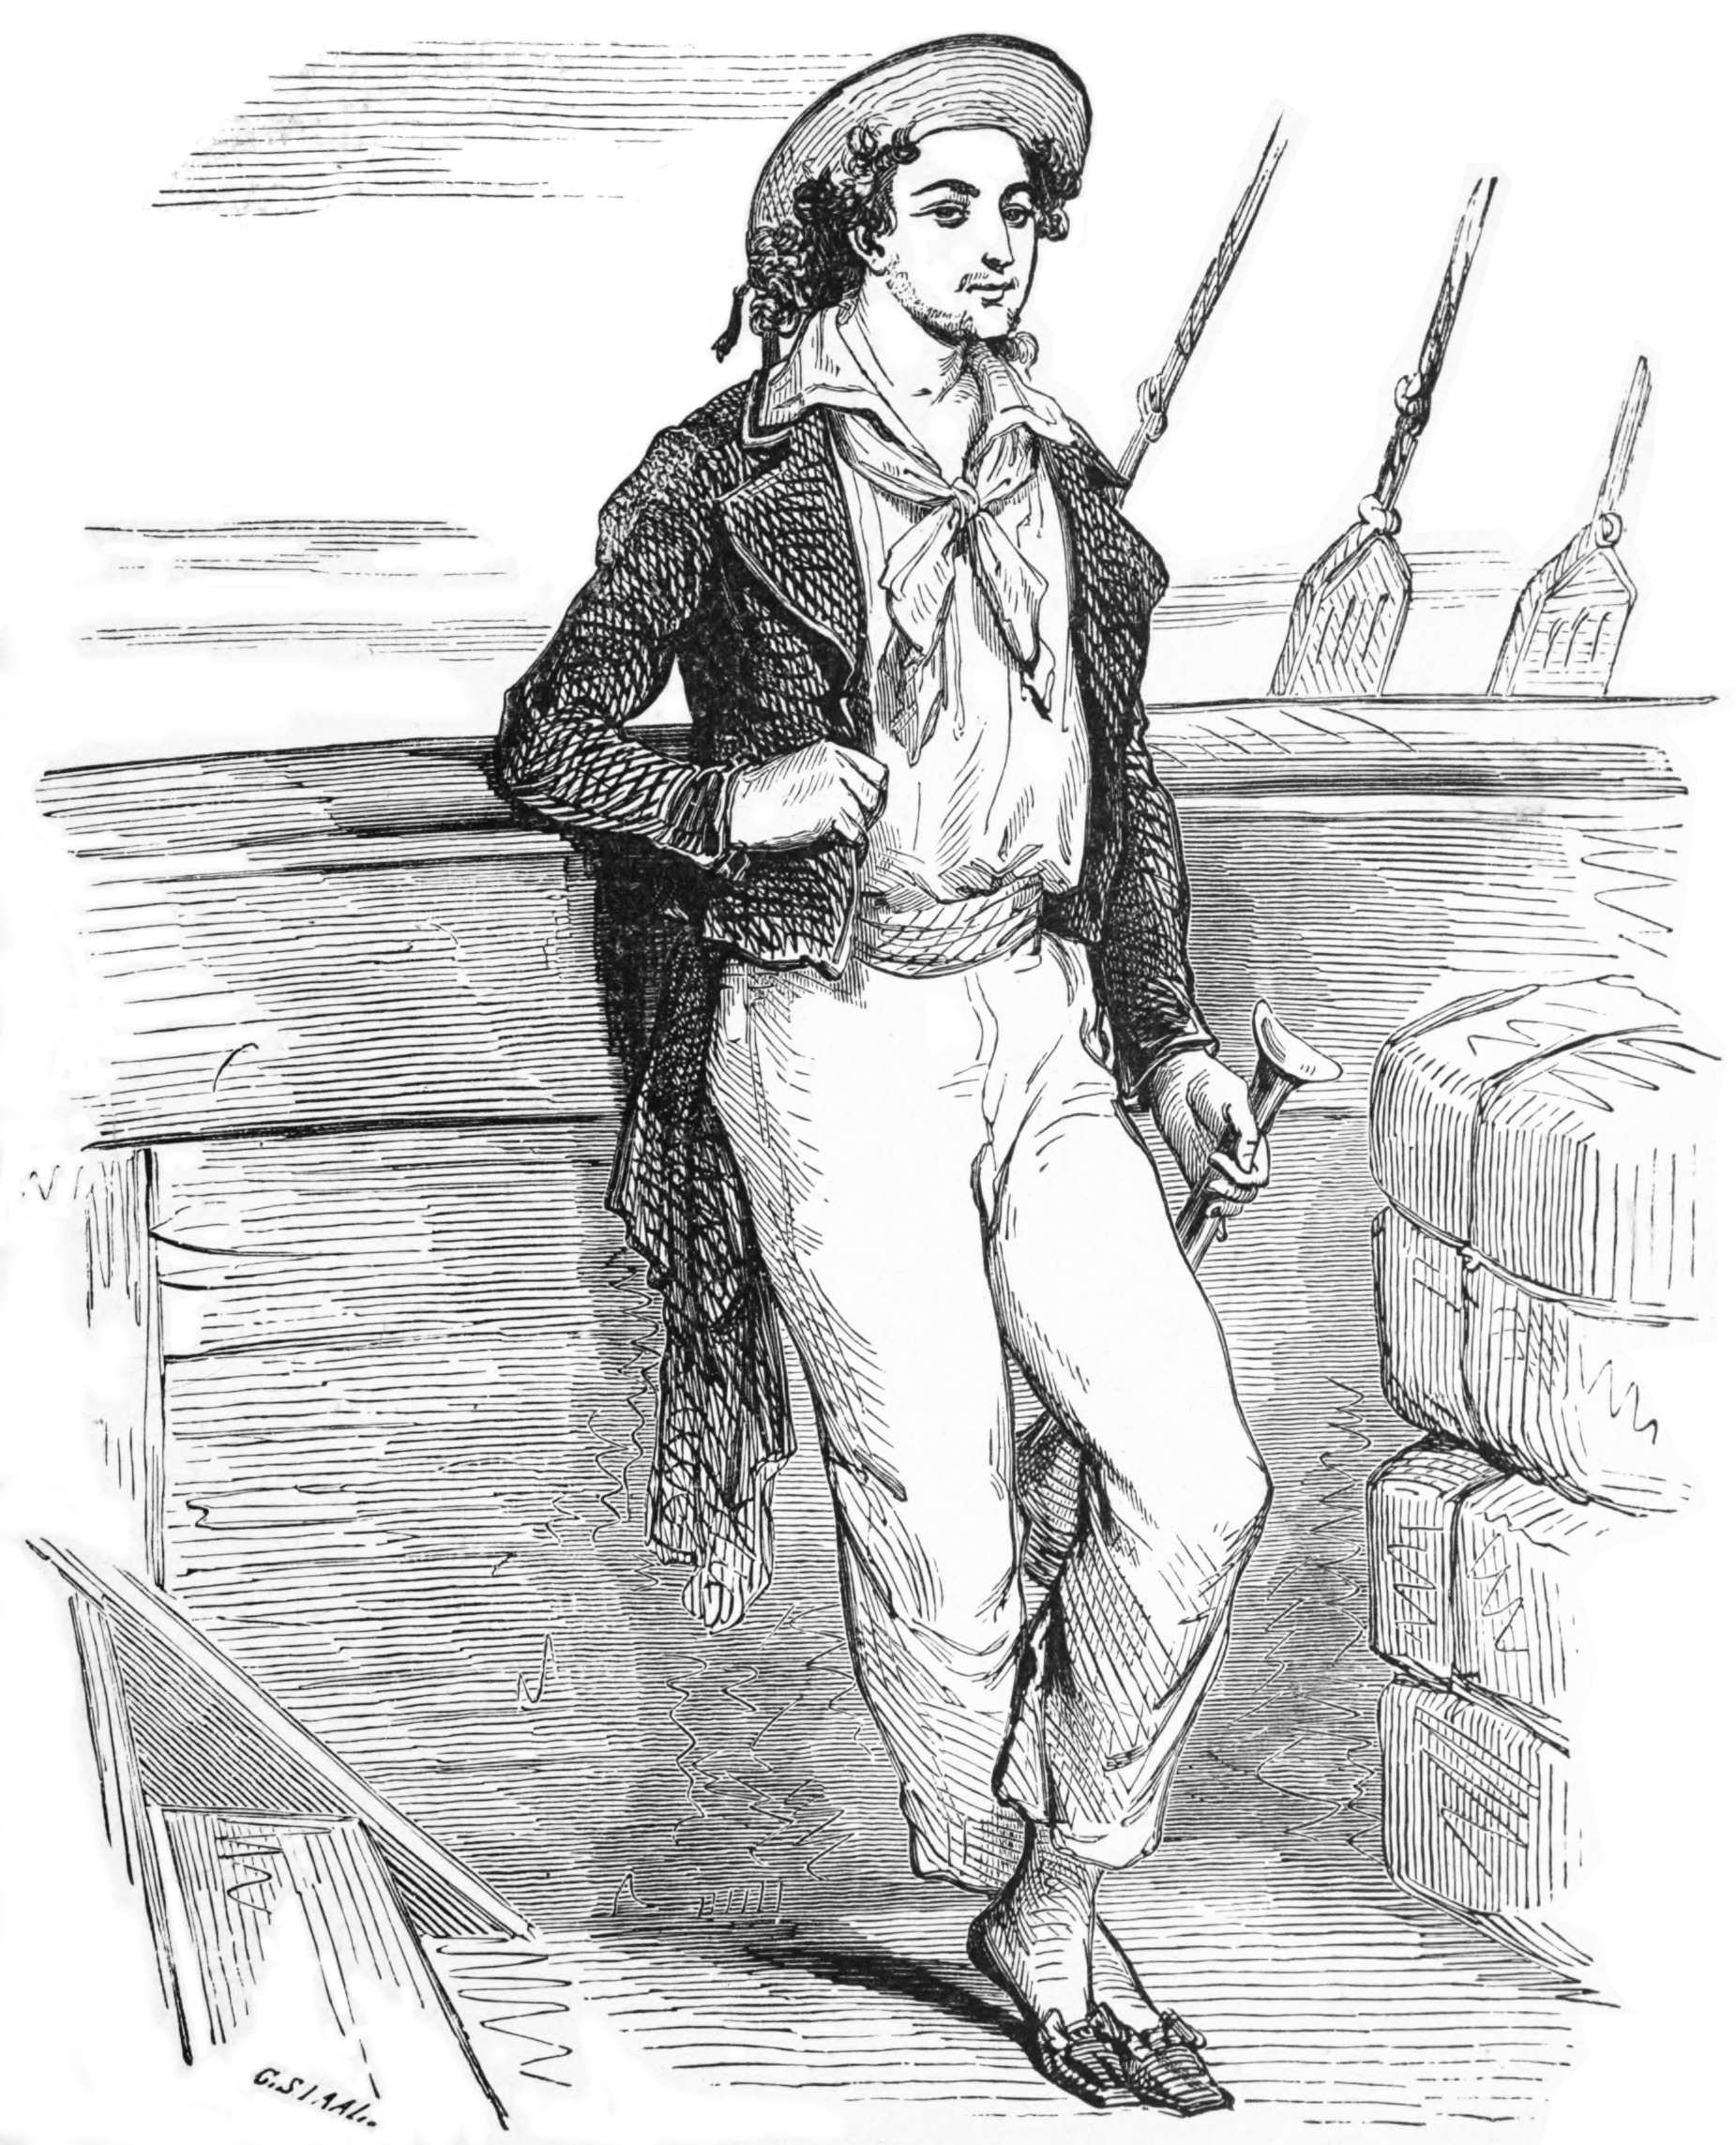 Illustration of Edmond Dantès by [[Pierre-Gustave Staal]] (1888).